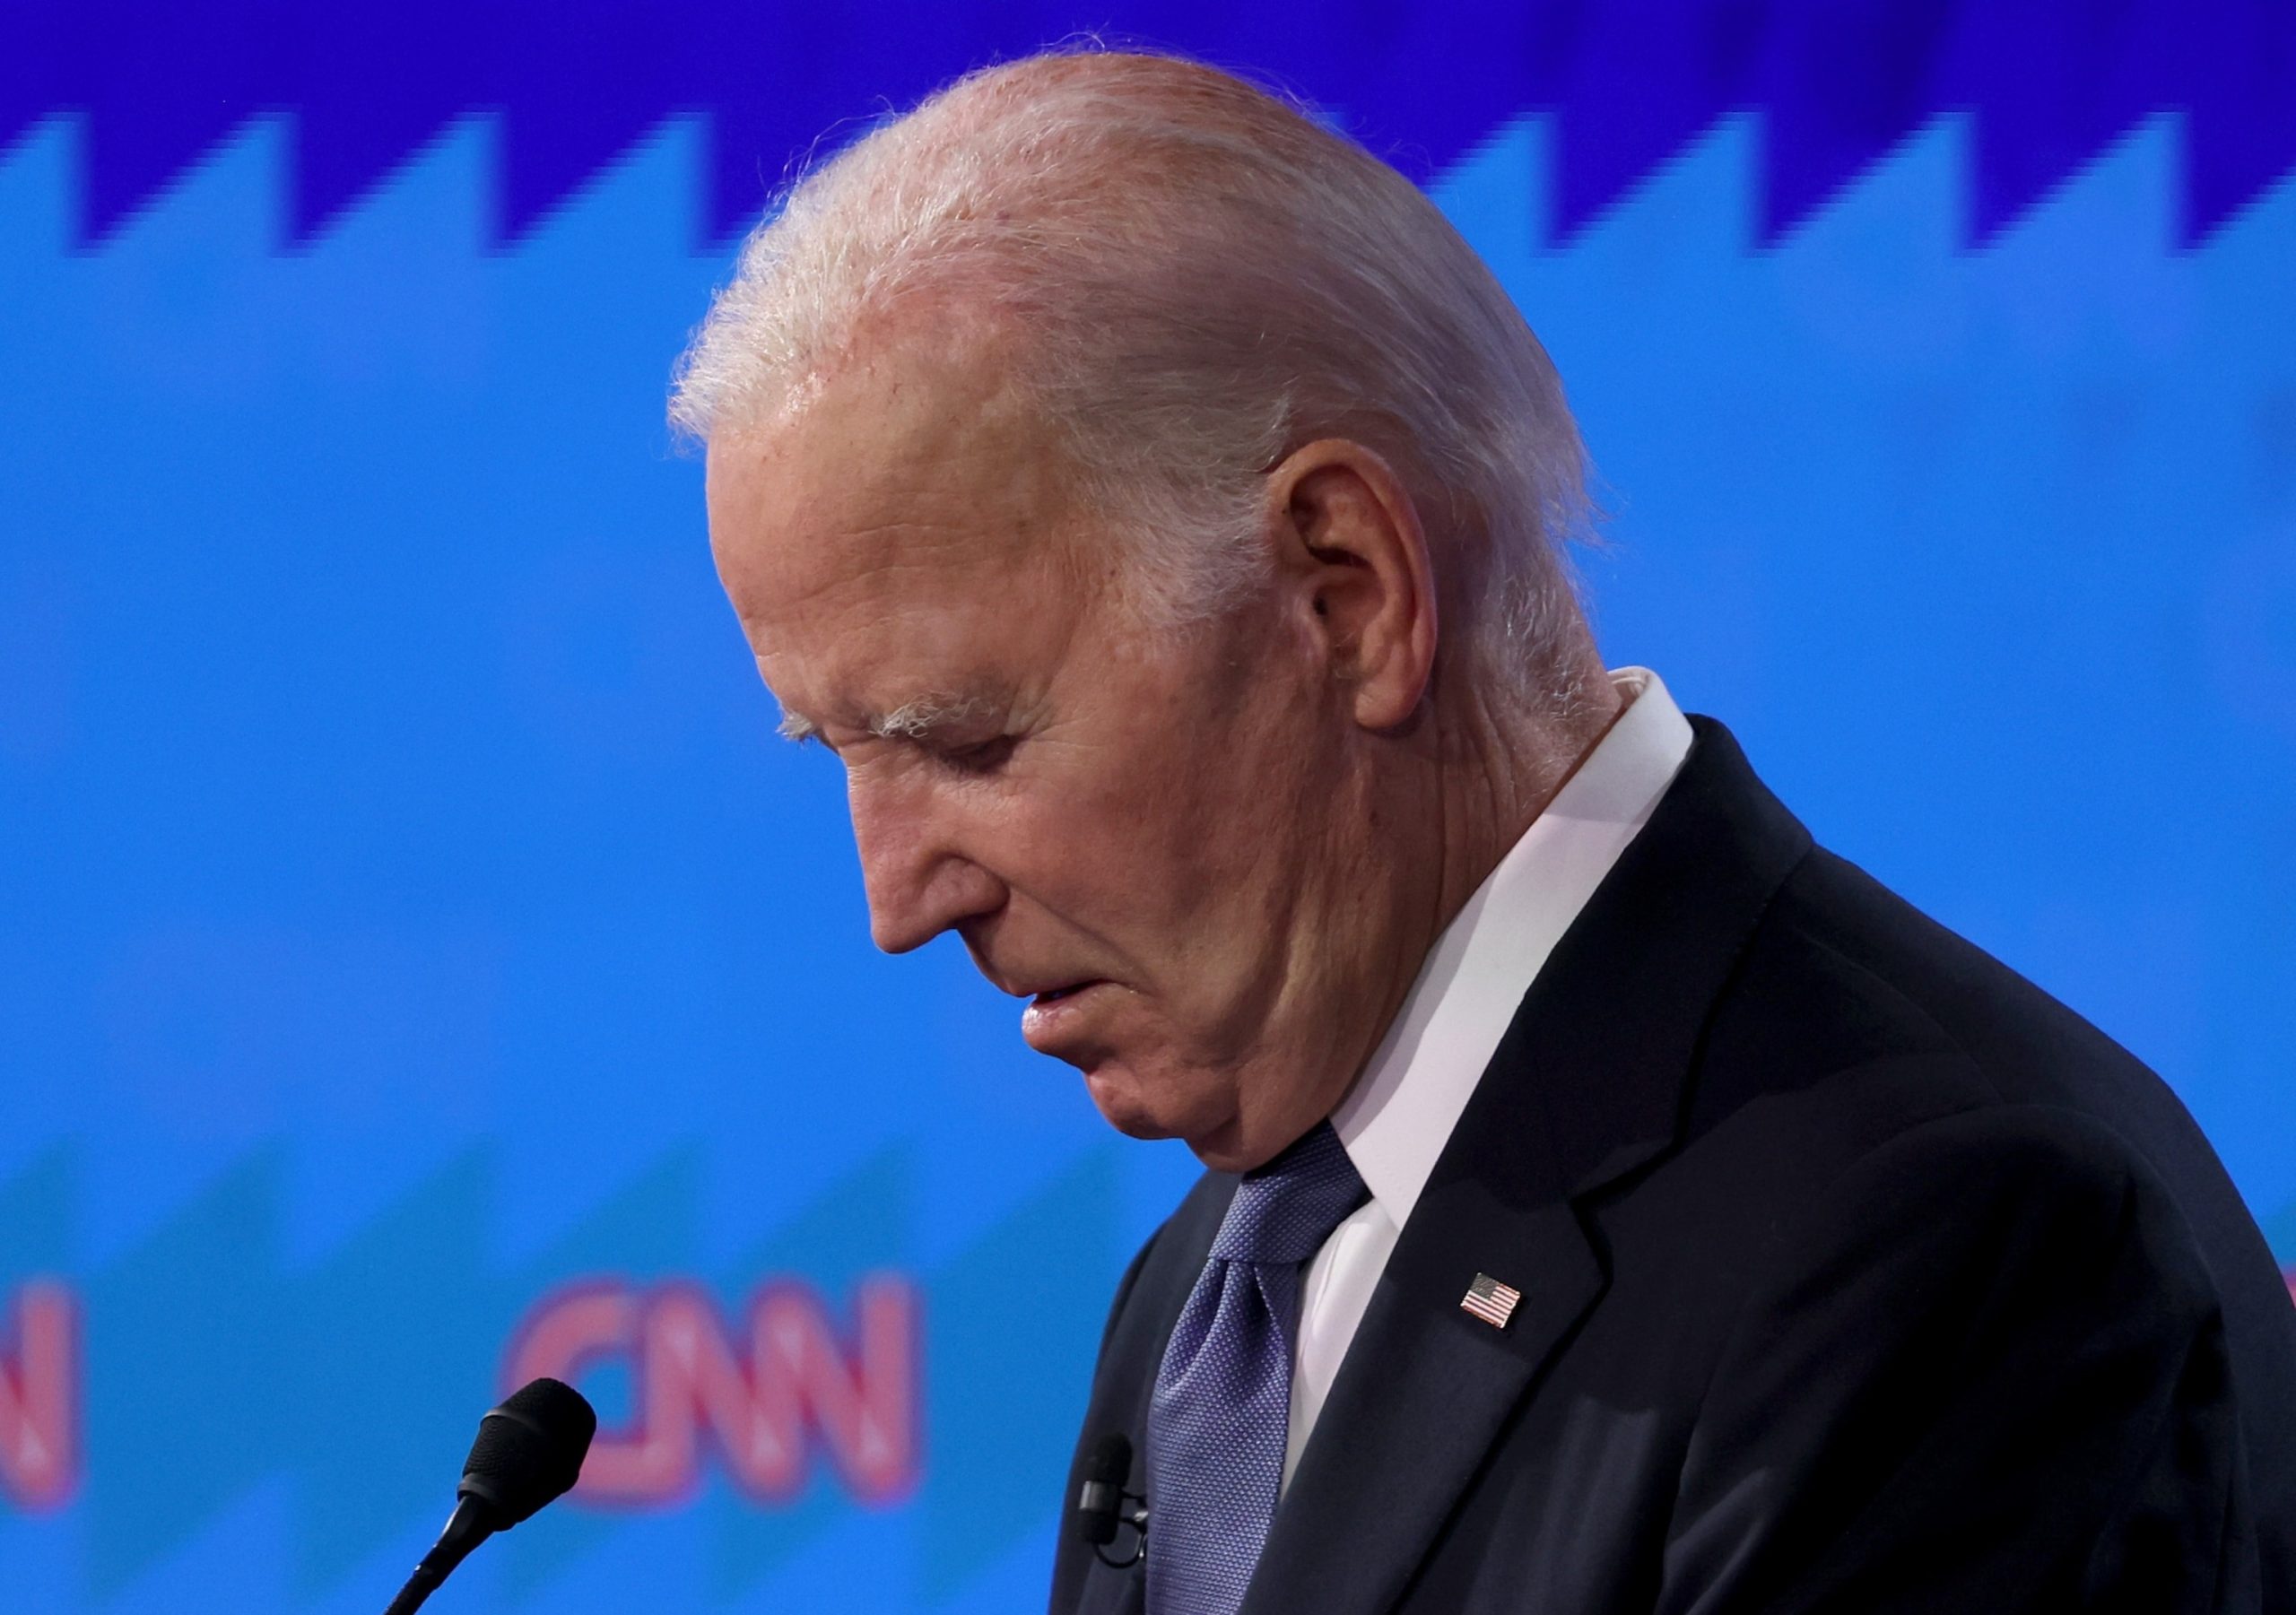 The Biden campaign warns of potential chaos if President drops out of race